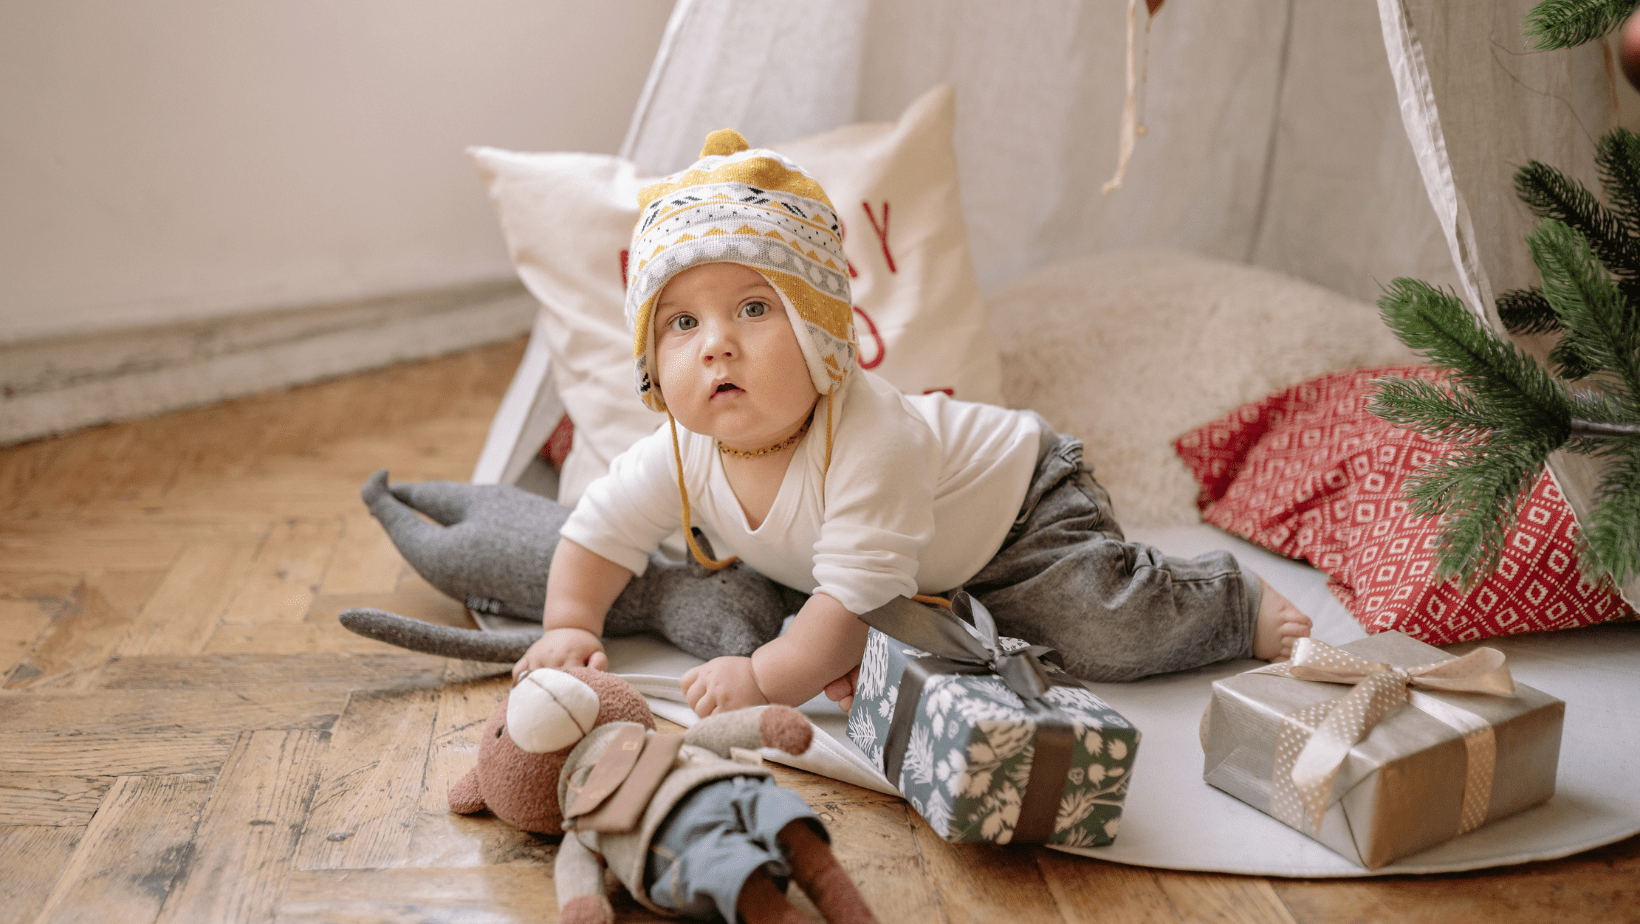 10 Best Baby Gifts Ideas for Boys or Newborns